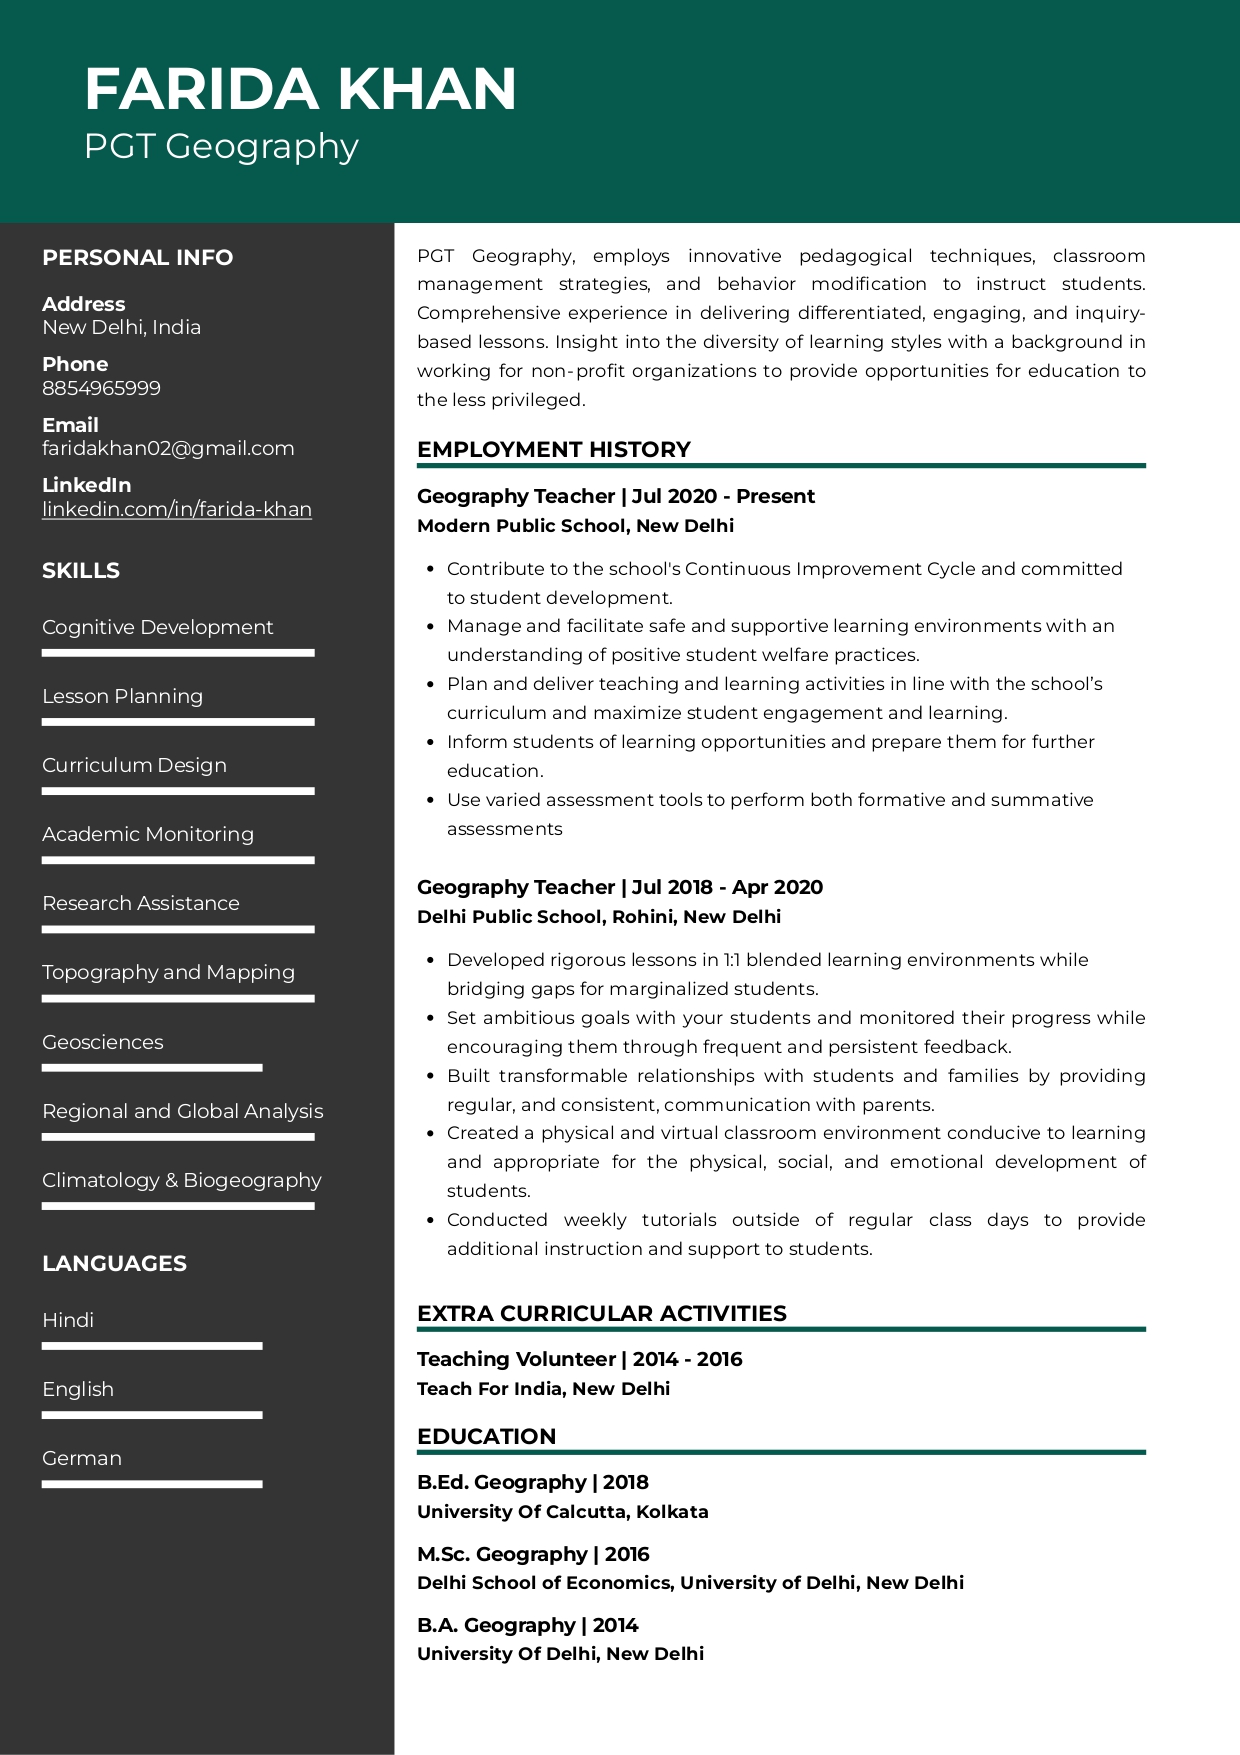 Sample Resume of PGT Geography | Free Resume Templates & Samples on Resumod.co